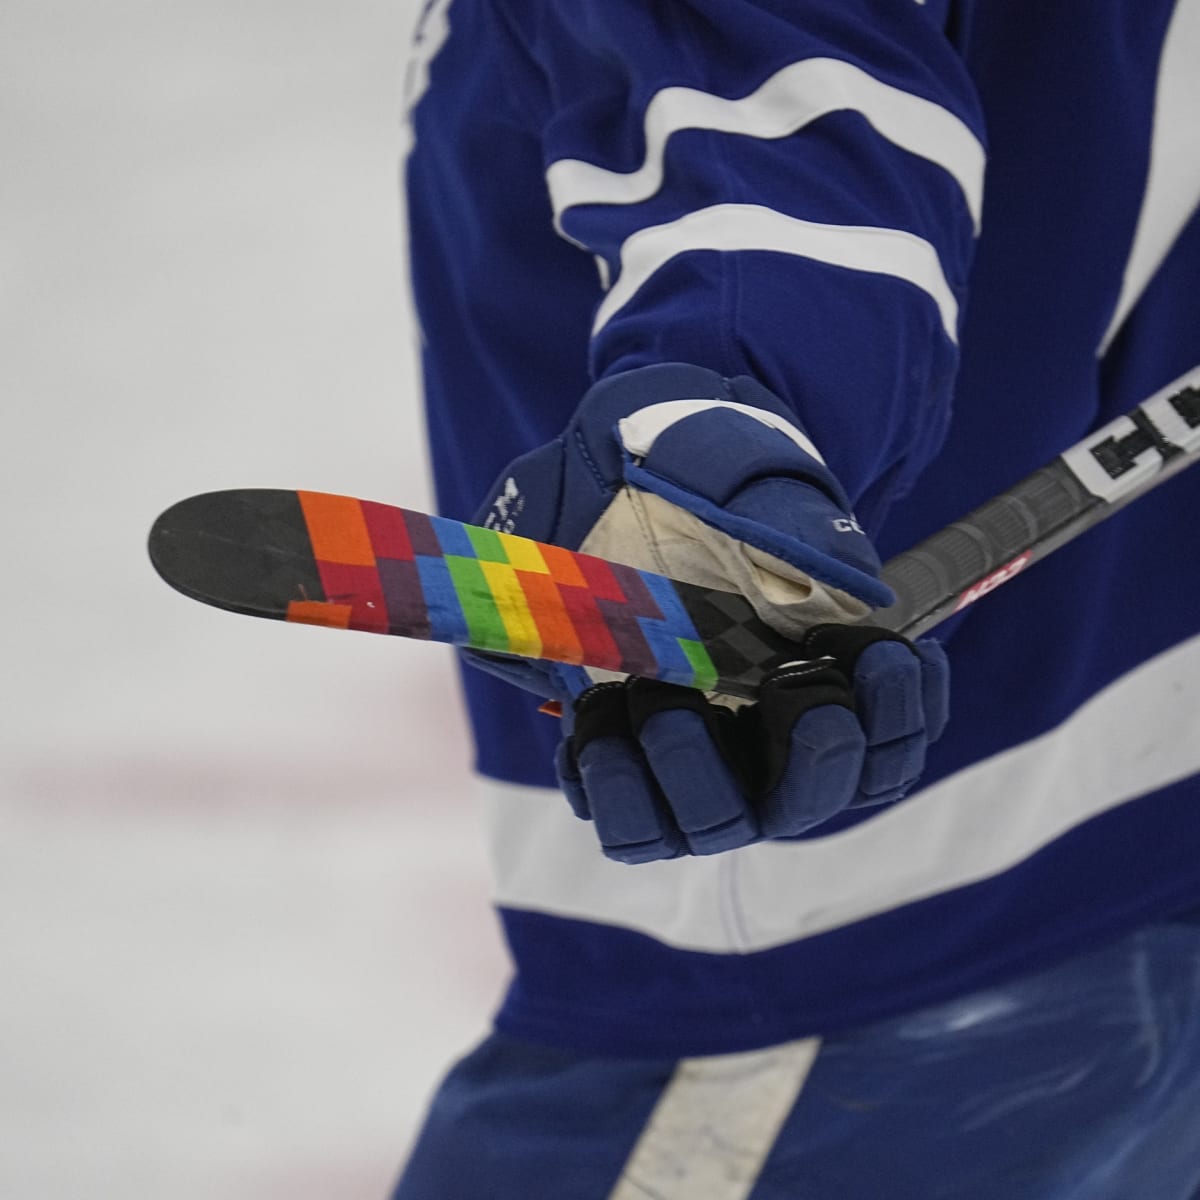 NHL Bans Pride Jerseys Because They've Become a 'Distraction